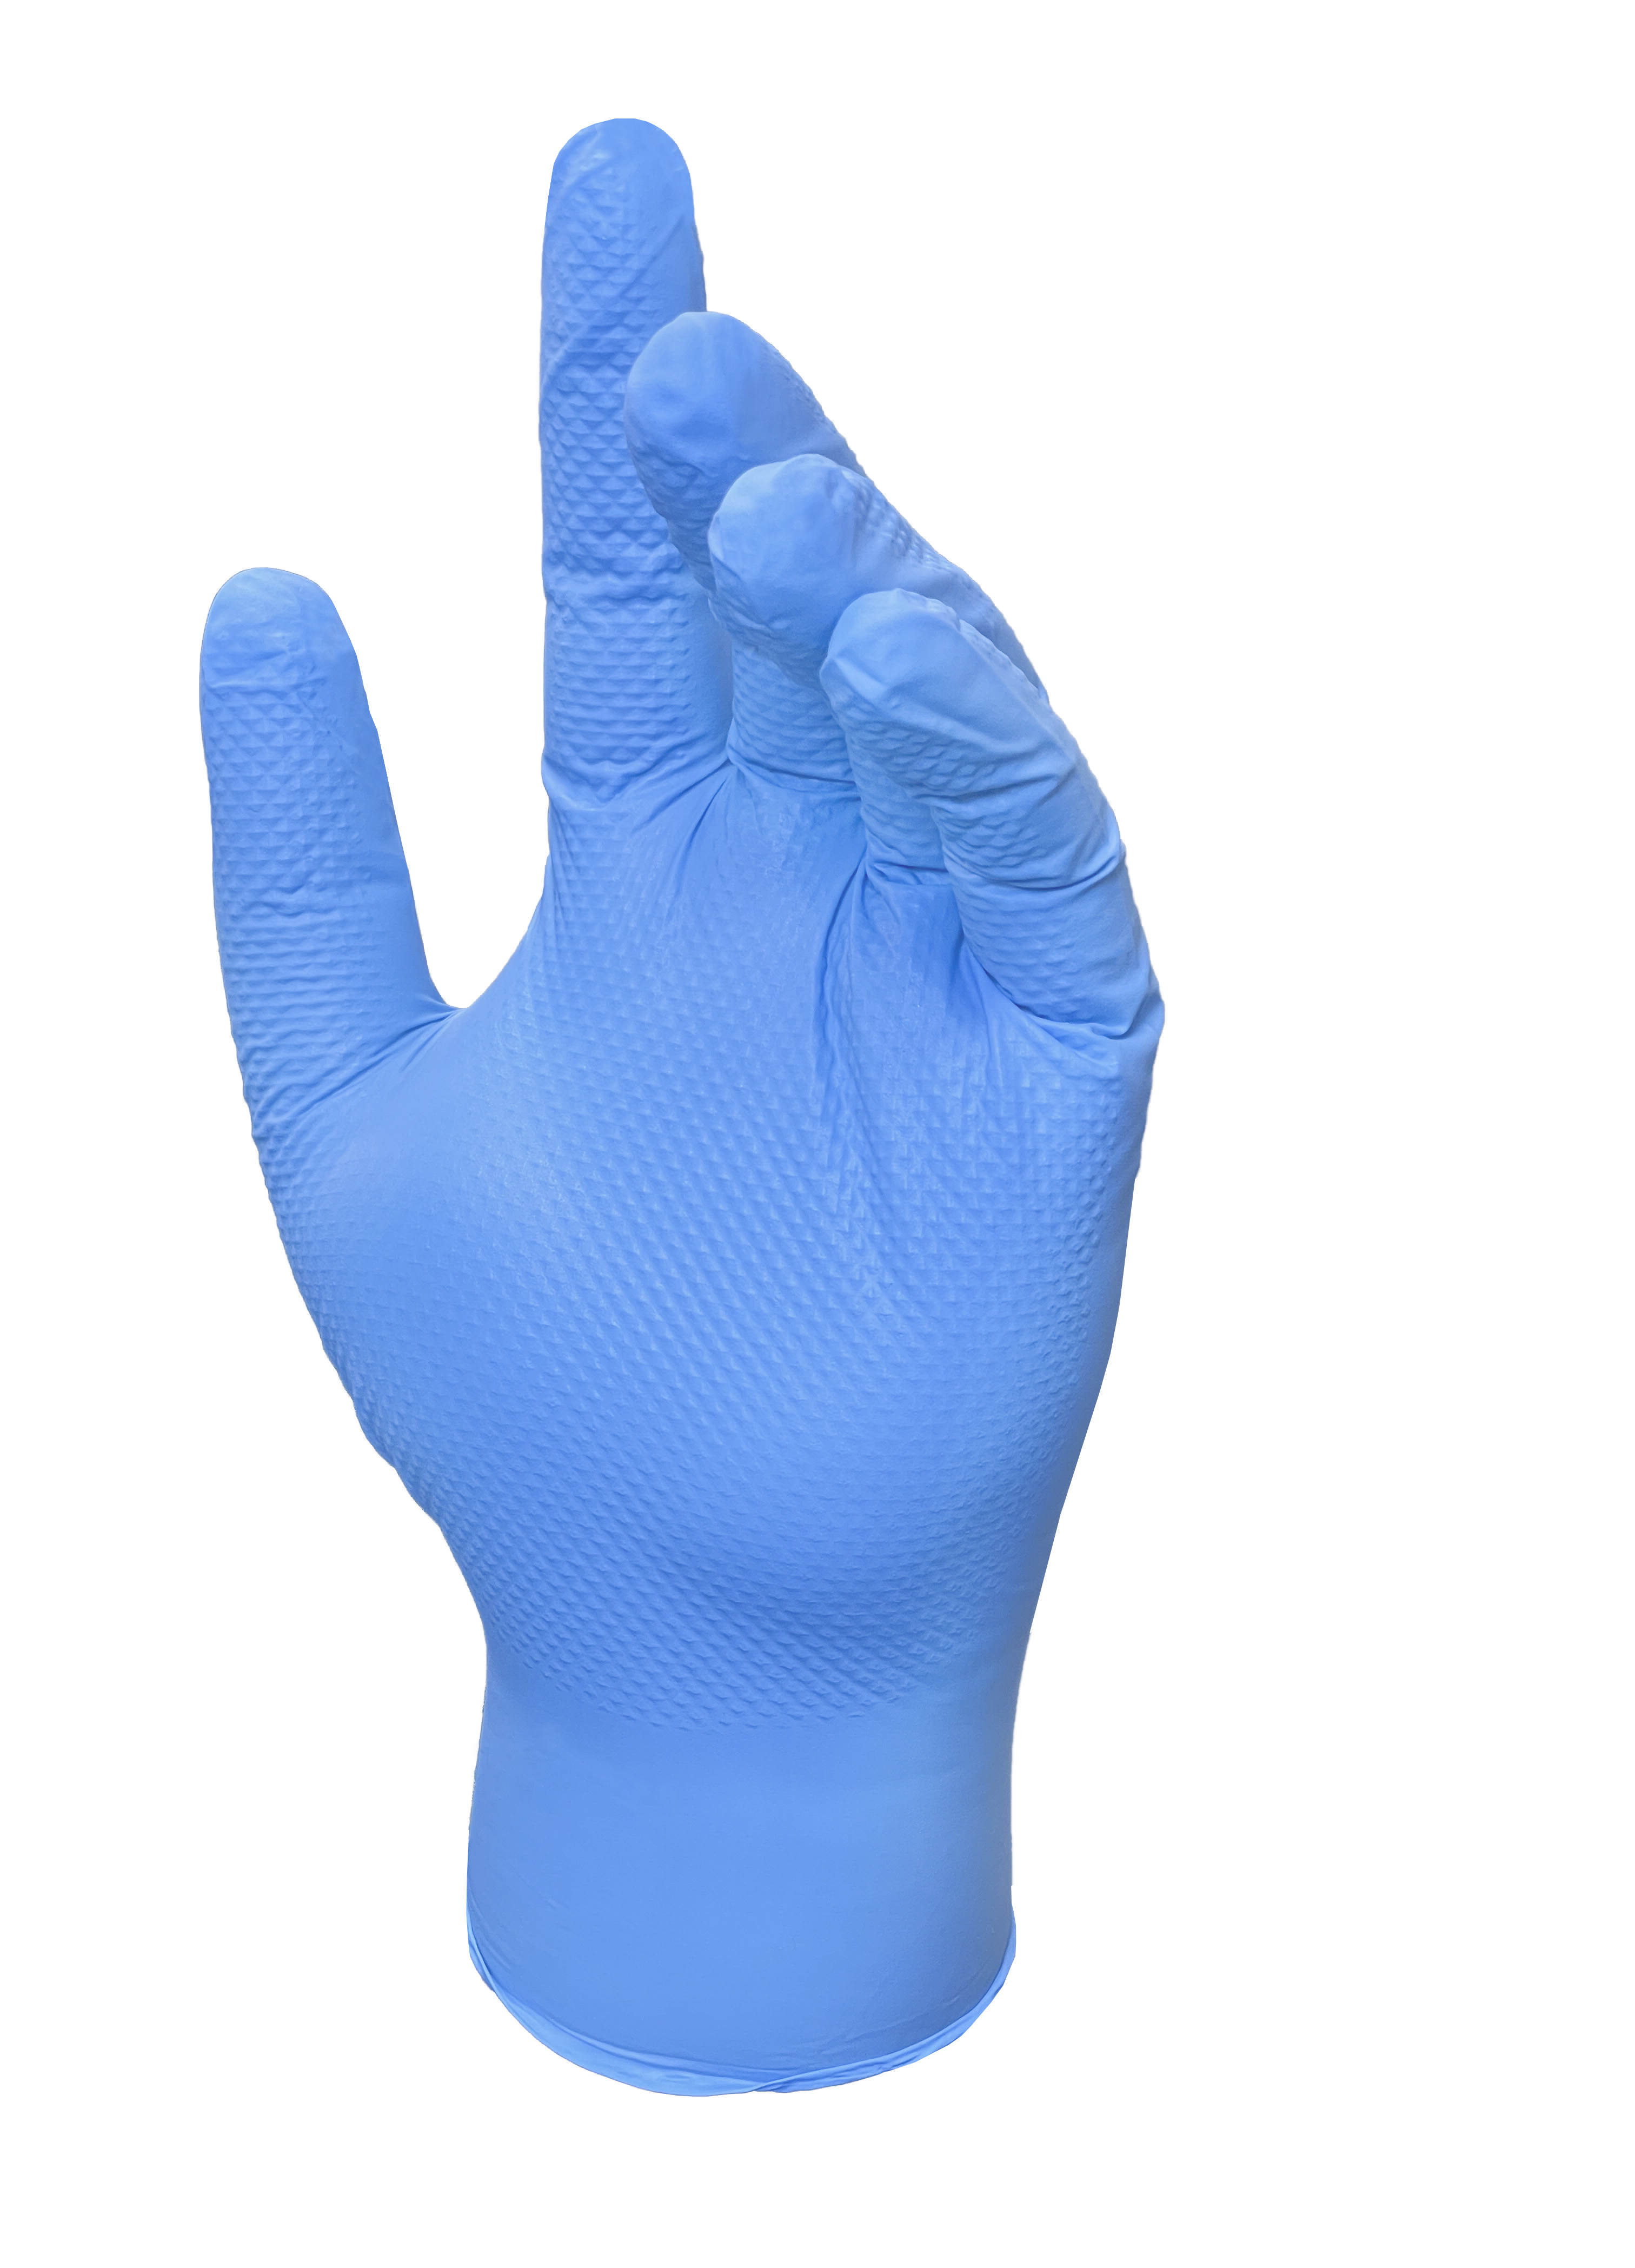 Grease Monkey Pro Cleaning, Disposable Nitrile Gloves, Blue, 50 Count Traction Grip, Male, Large - image 2 of 6